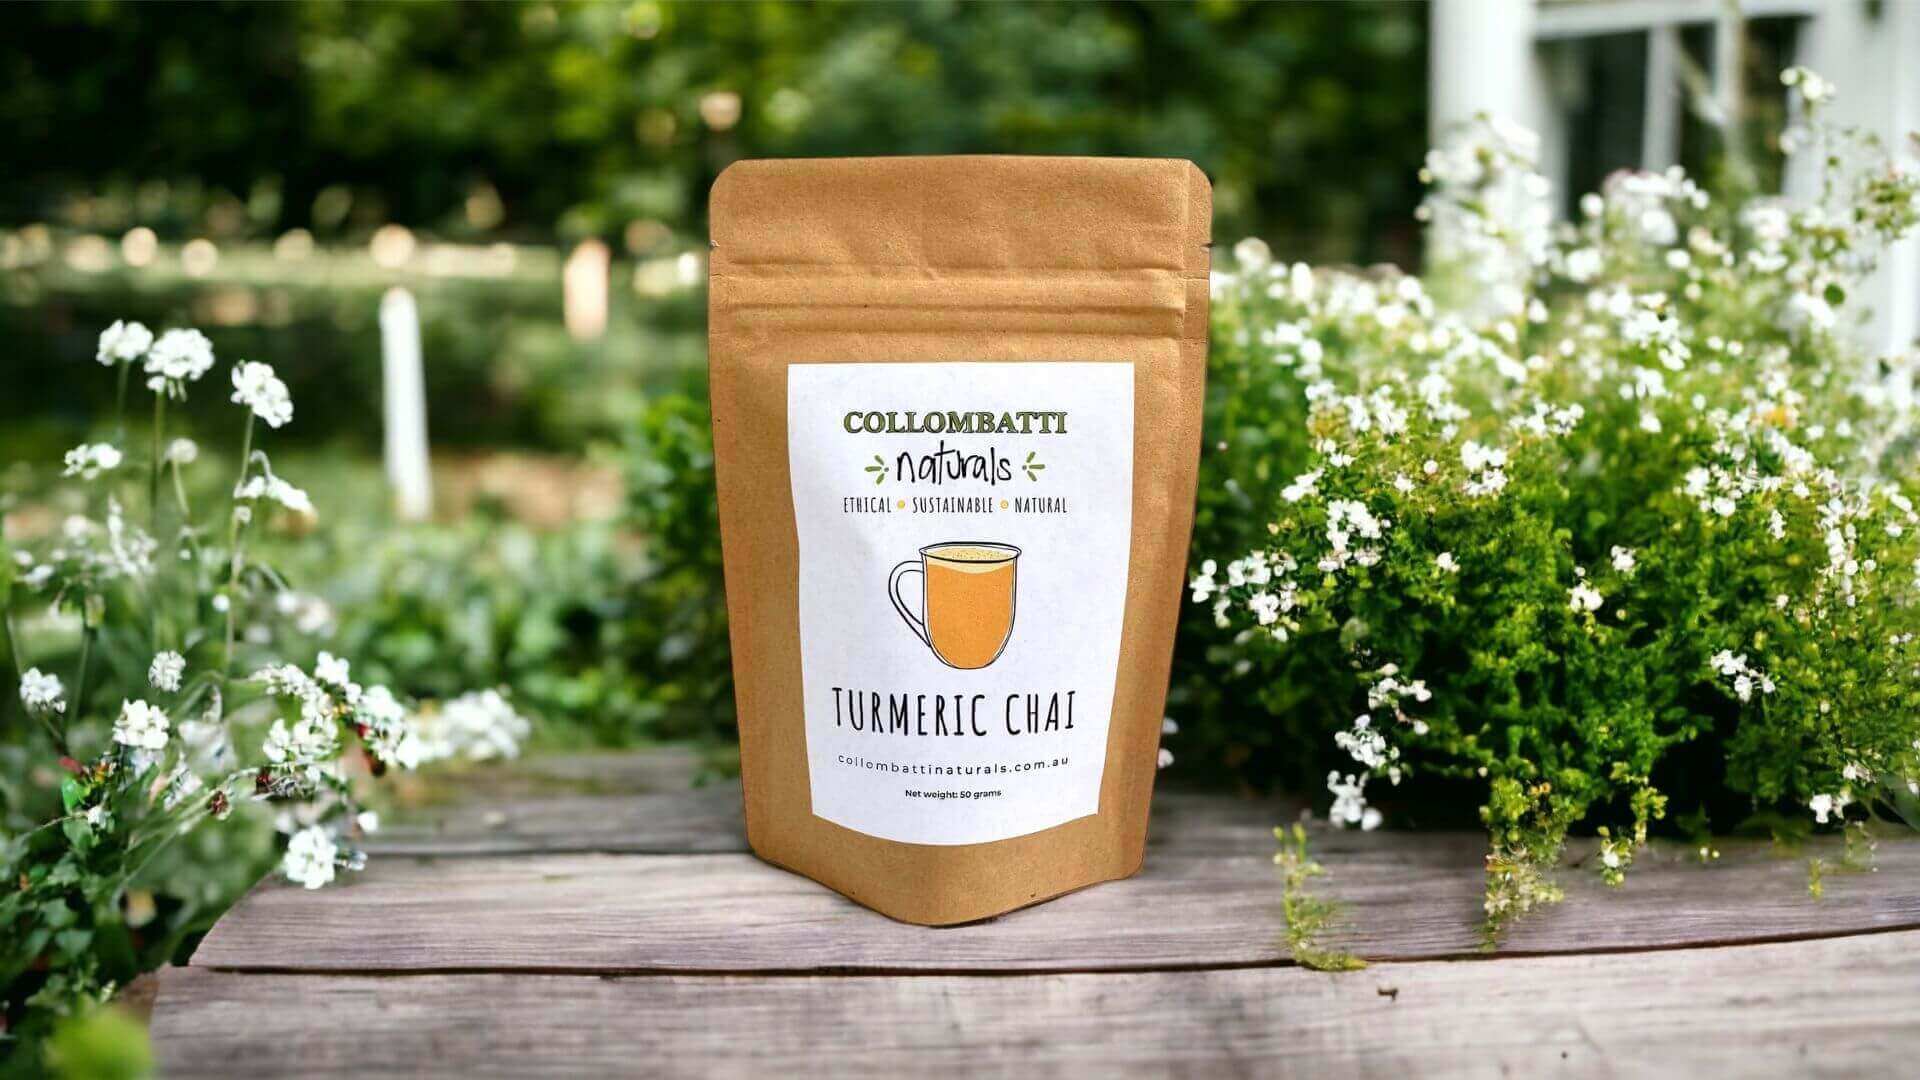 Collombatti Naturals Eco-Friendly Packaging Creating a Sustainable Business picutre of Turmeric Chai in earth friendly packaging